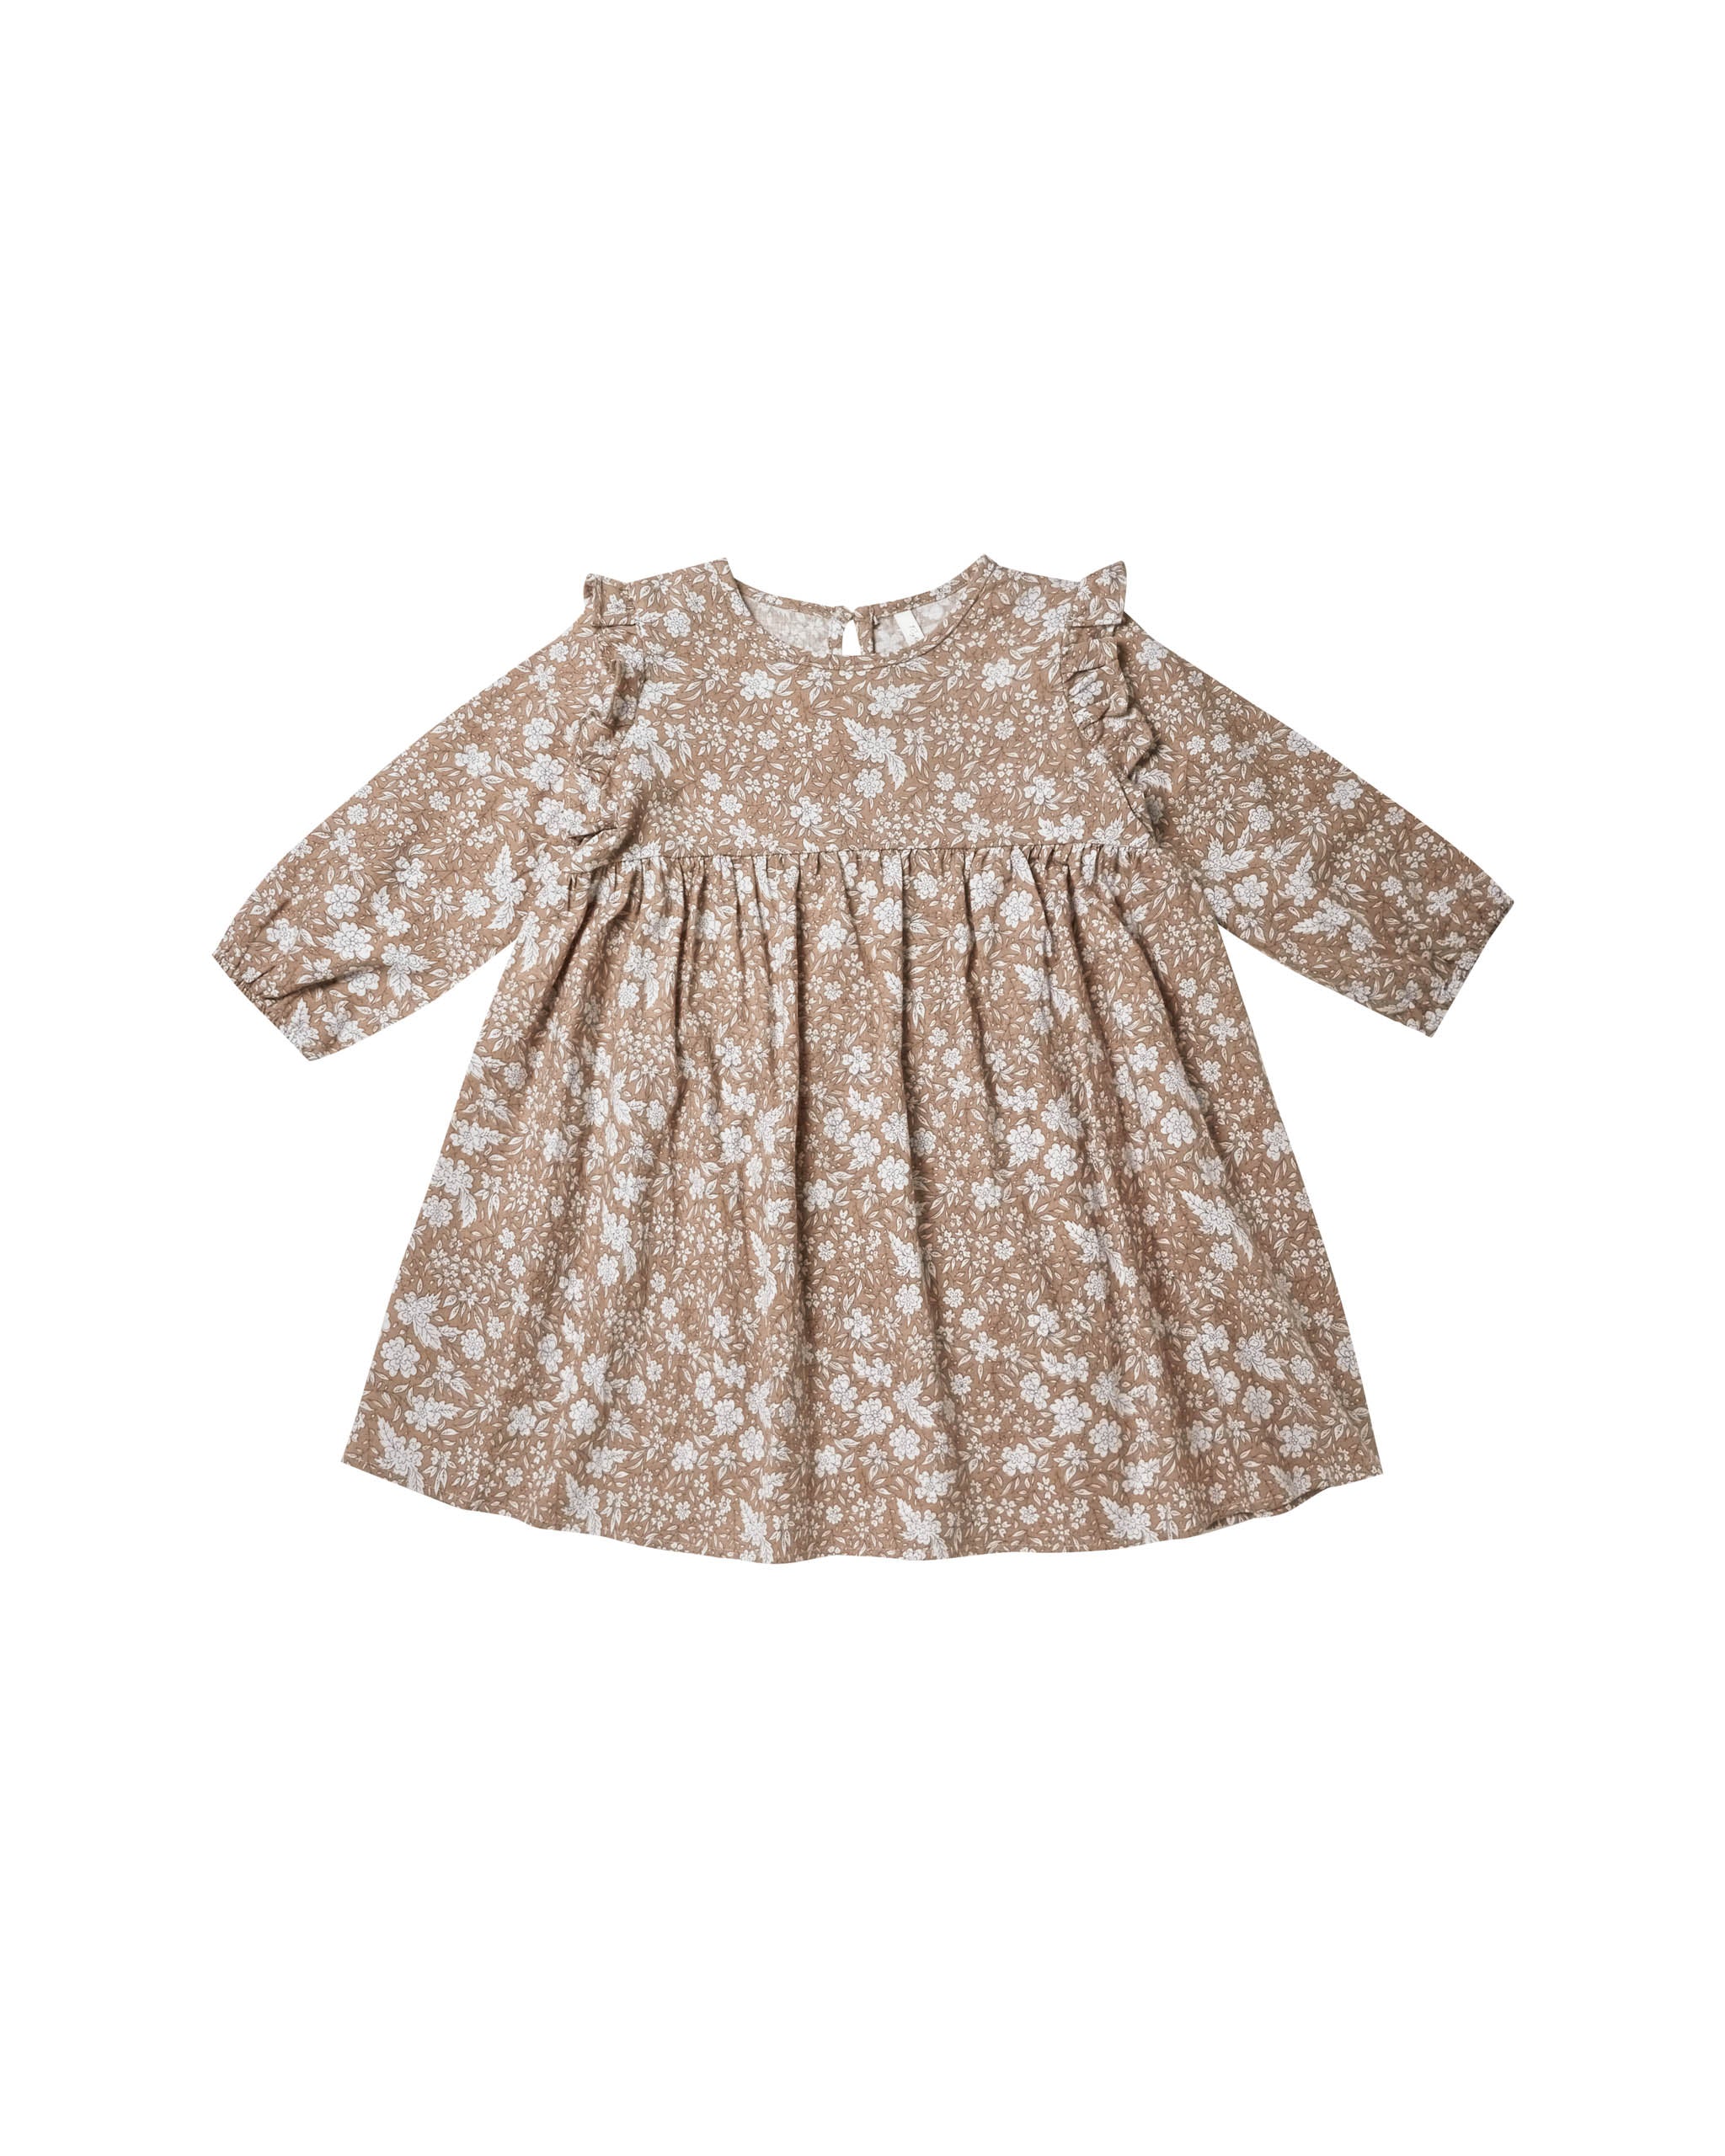 PIPER DRESS | SOFT FLORAL - LAST ONE 6/7Y